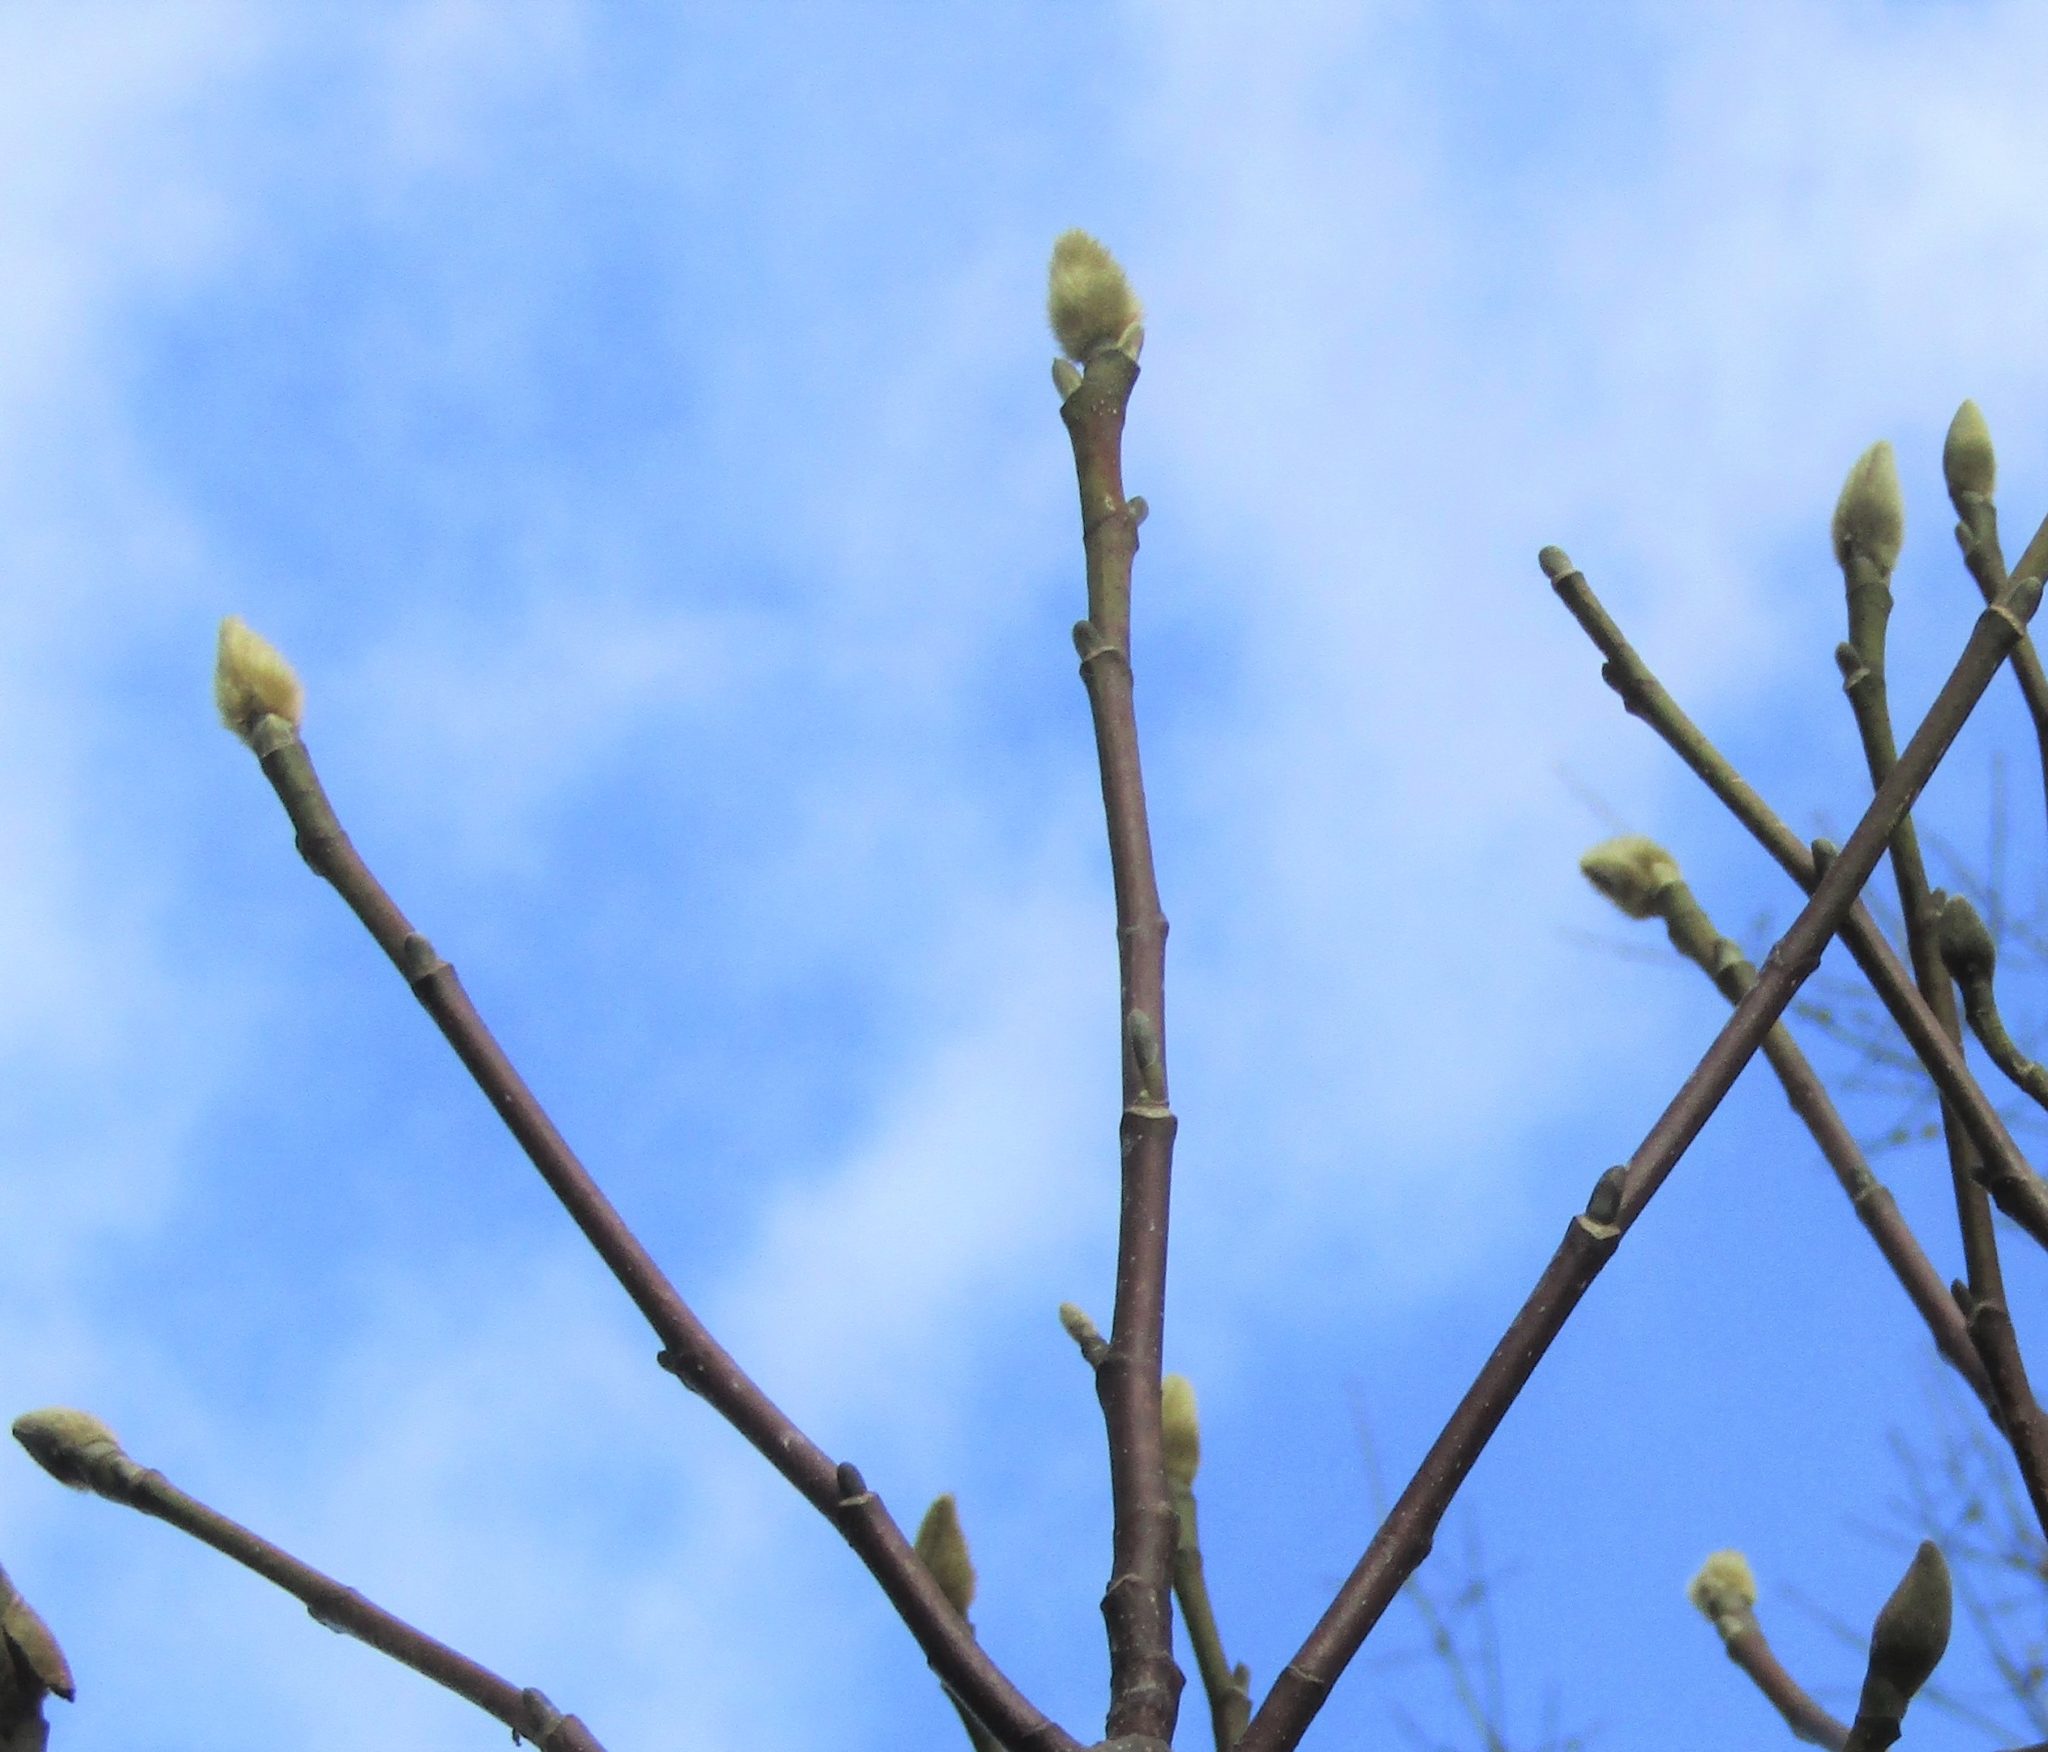 Magnolia buds with a blue background